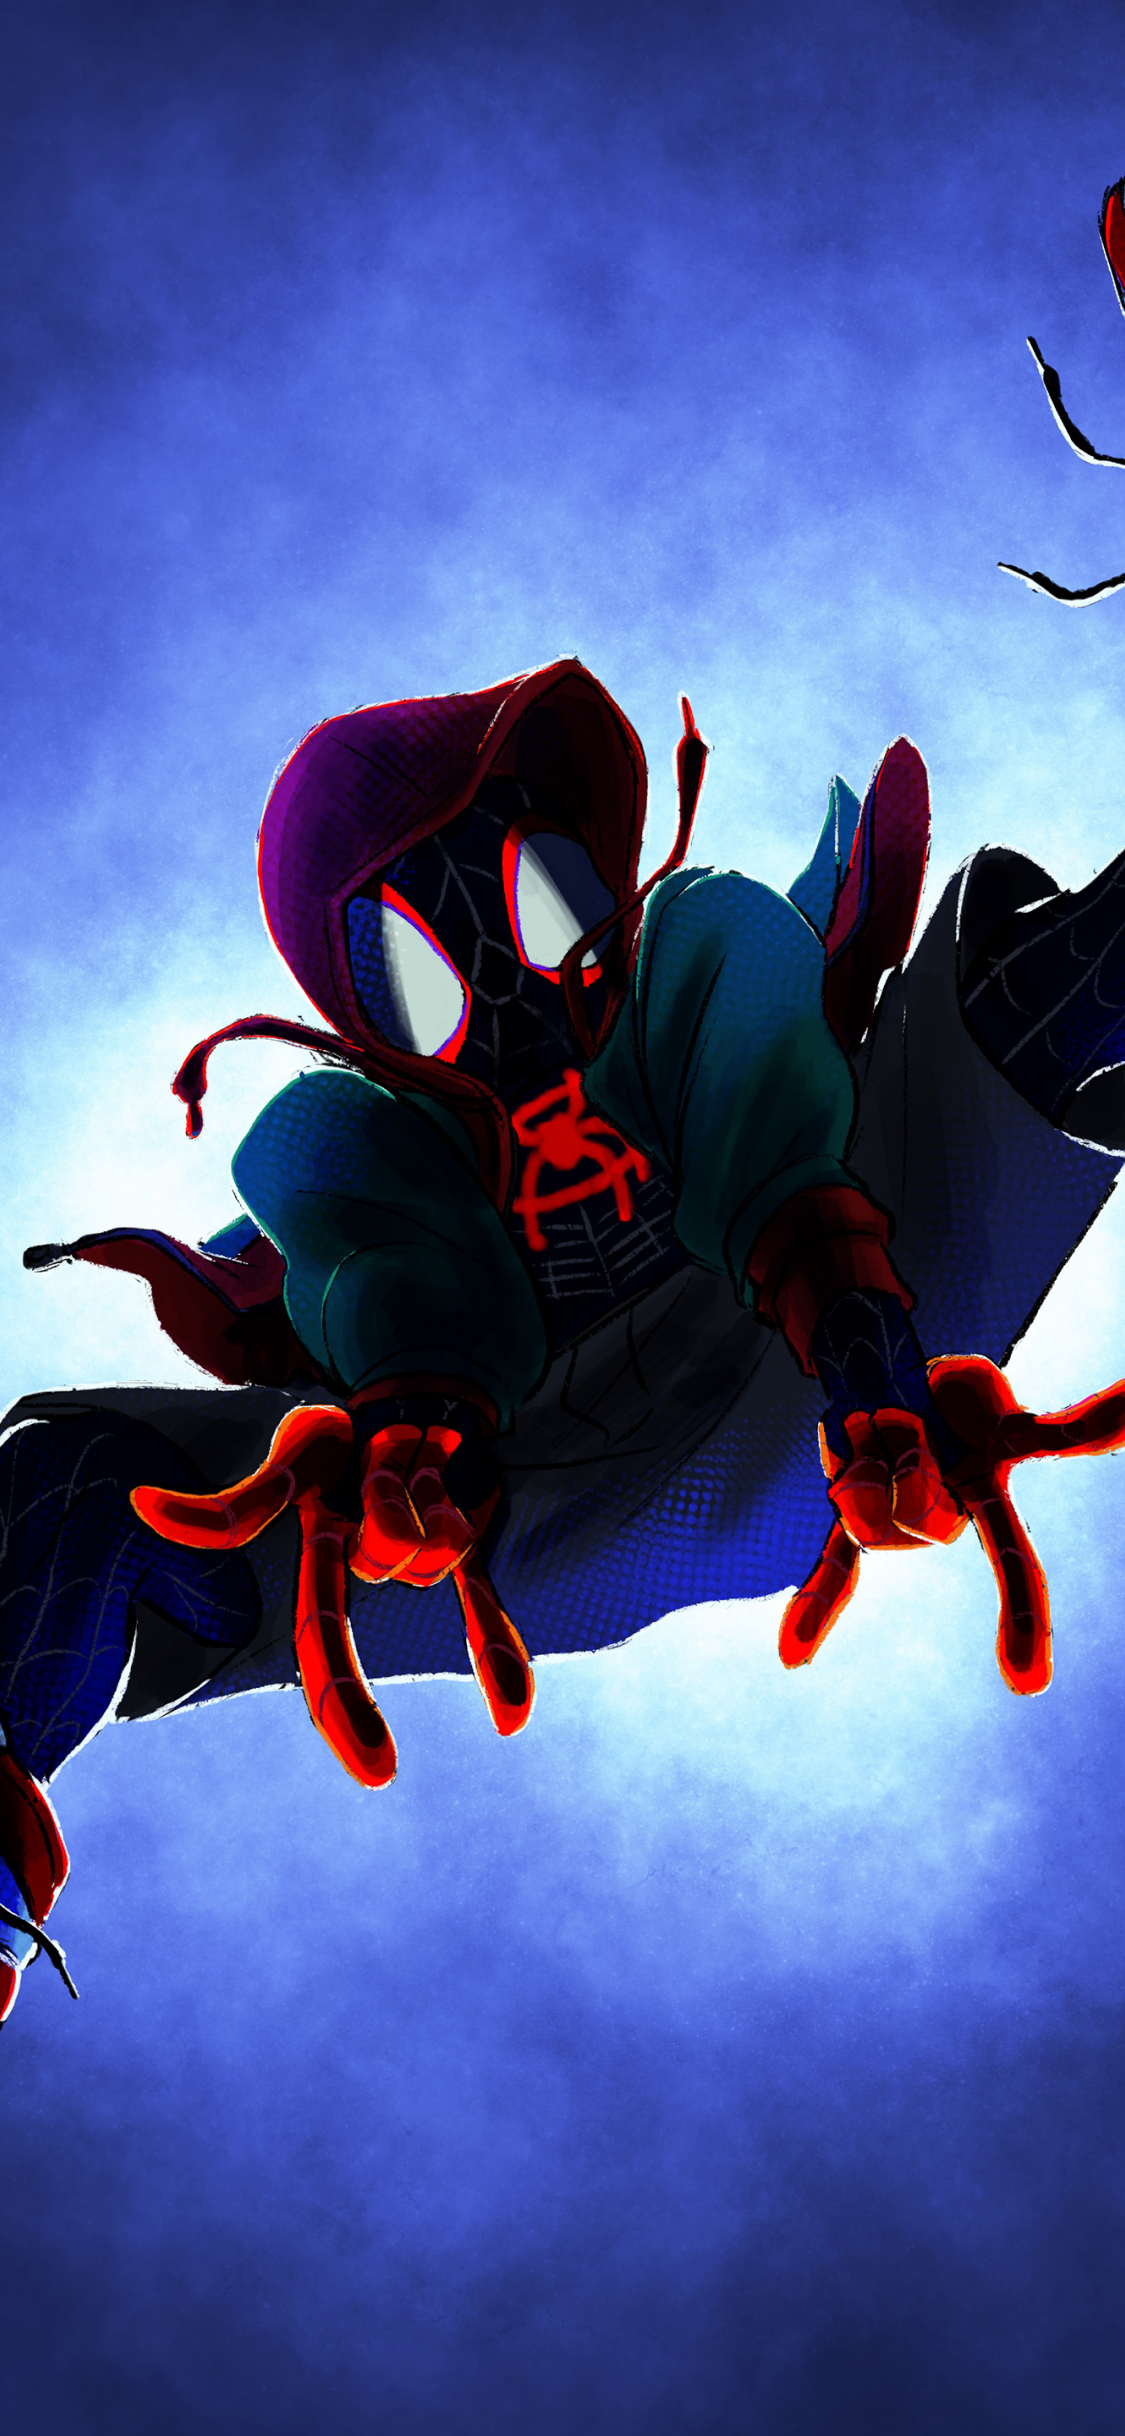 Download 1125x2436 Wallpaper Spider Man Into The Spider